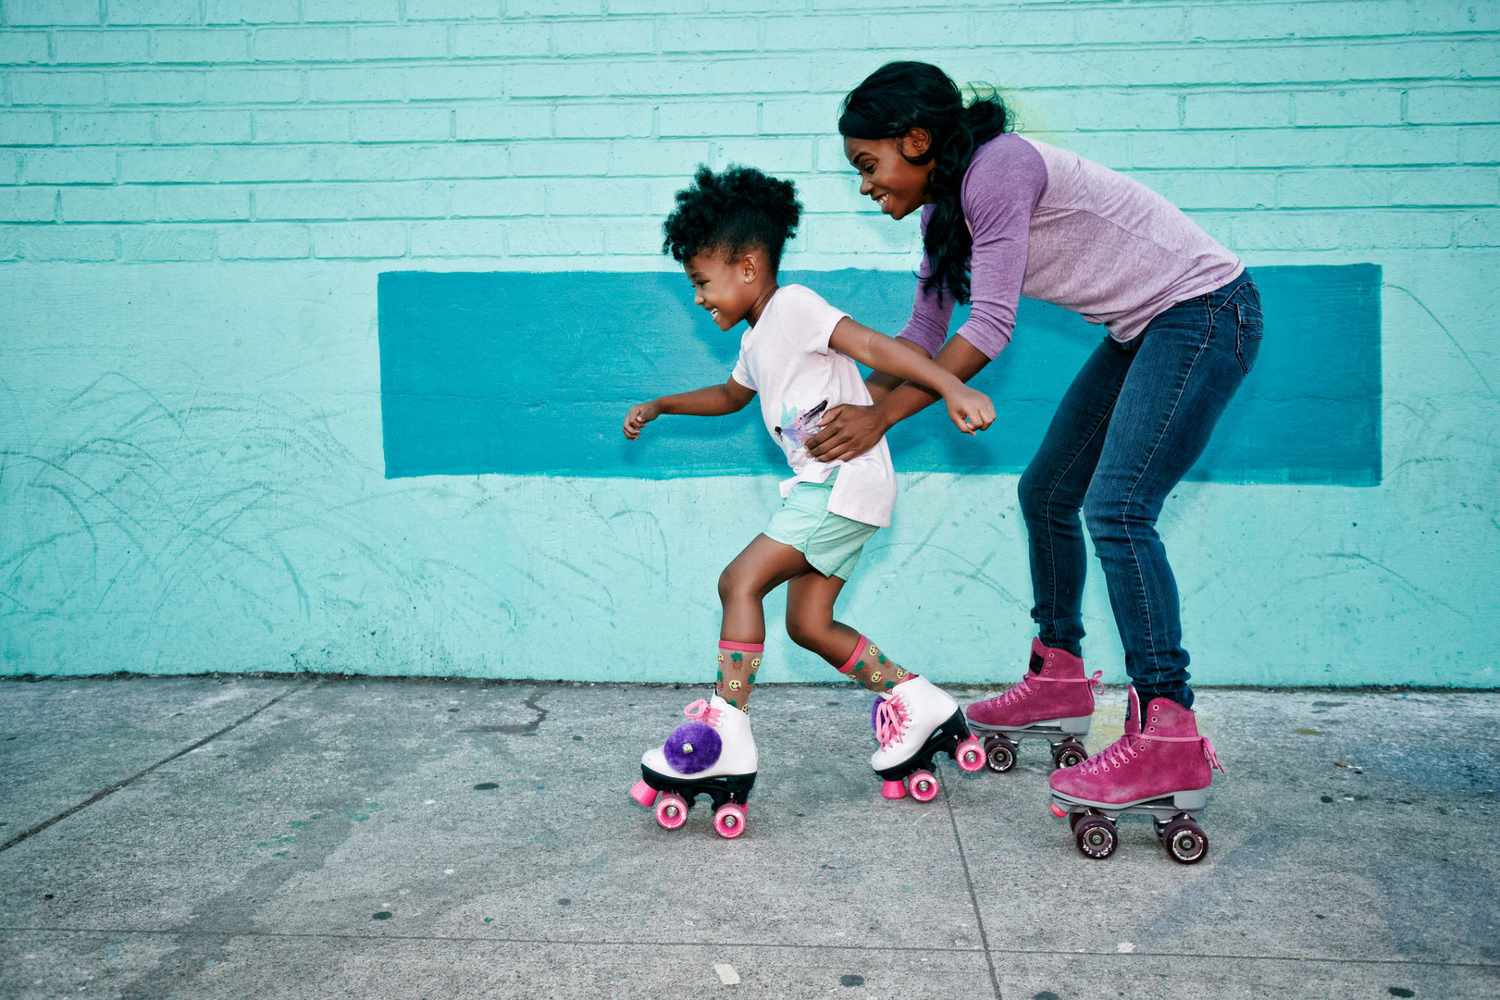 An image of a mom and daughter roller skating.